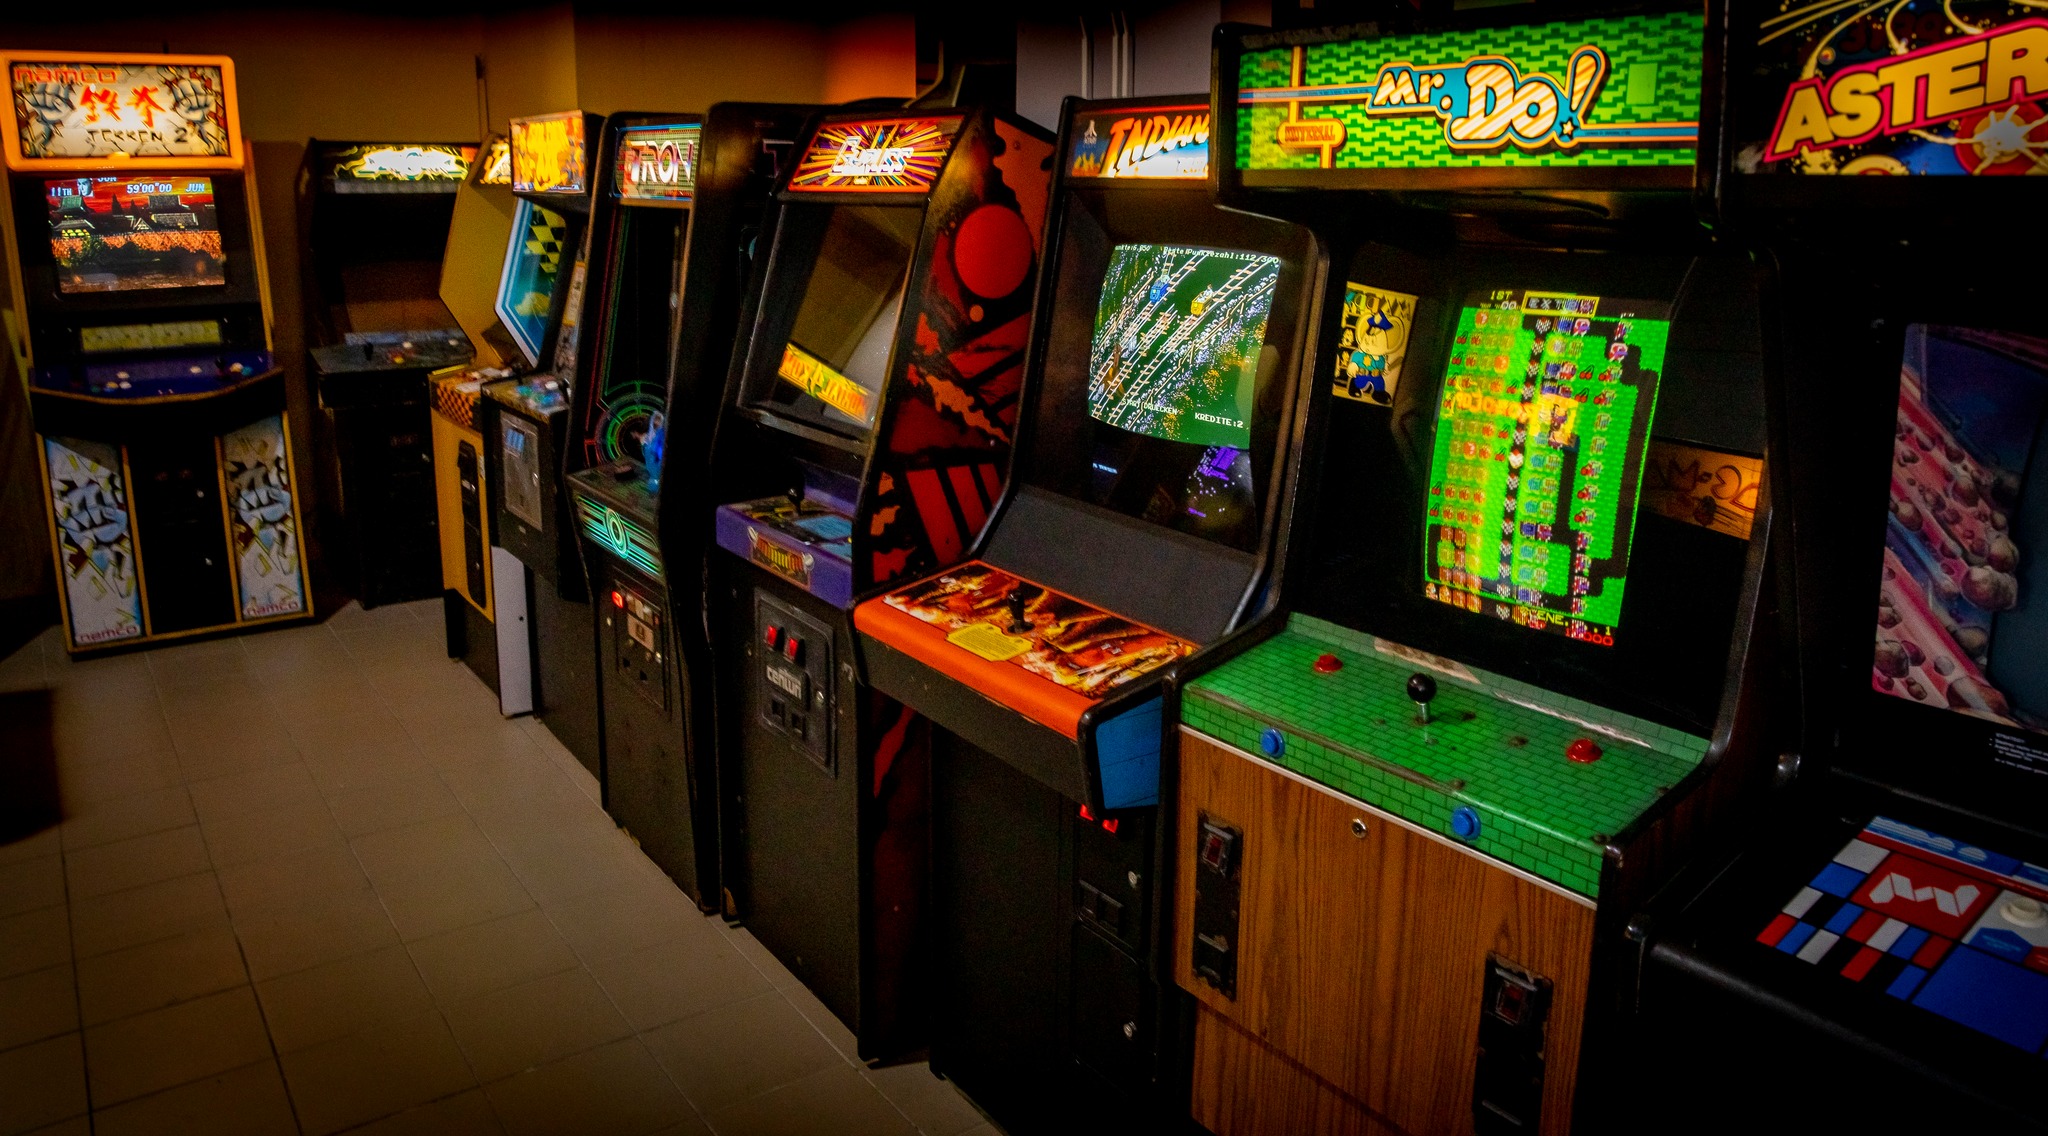 Updated: 100 Arcade Machines to Take You Back to Childhood @ Savoya Park Budapest